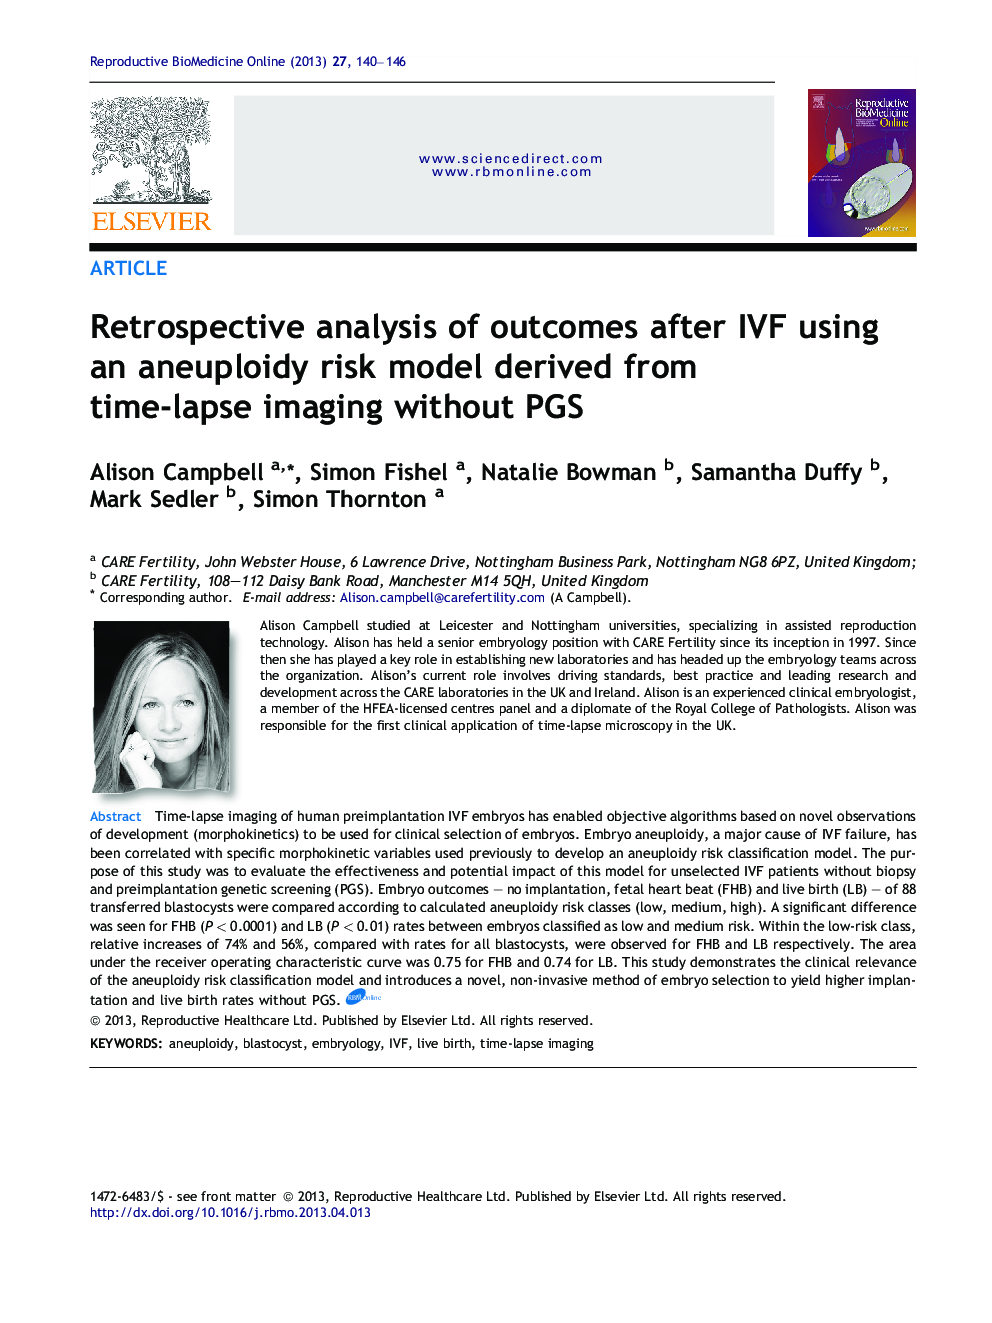 Retrospective analysis of outcomes after IVF using an aneuploidy risk model derived from time-lapse imaging without PGS 